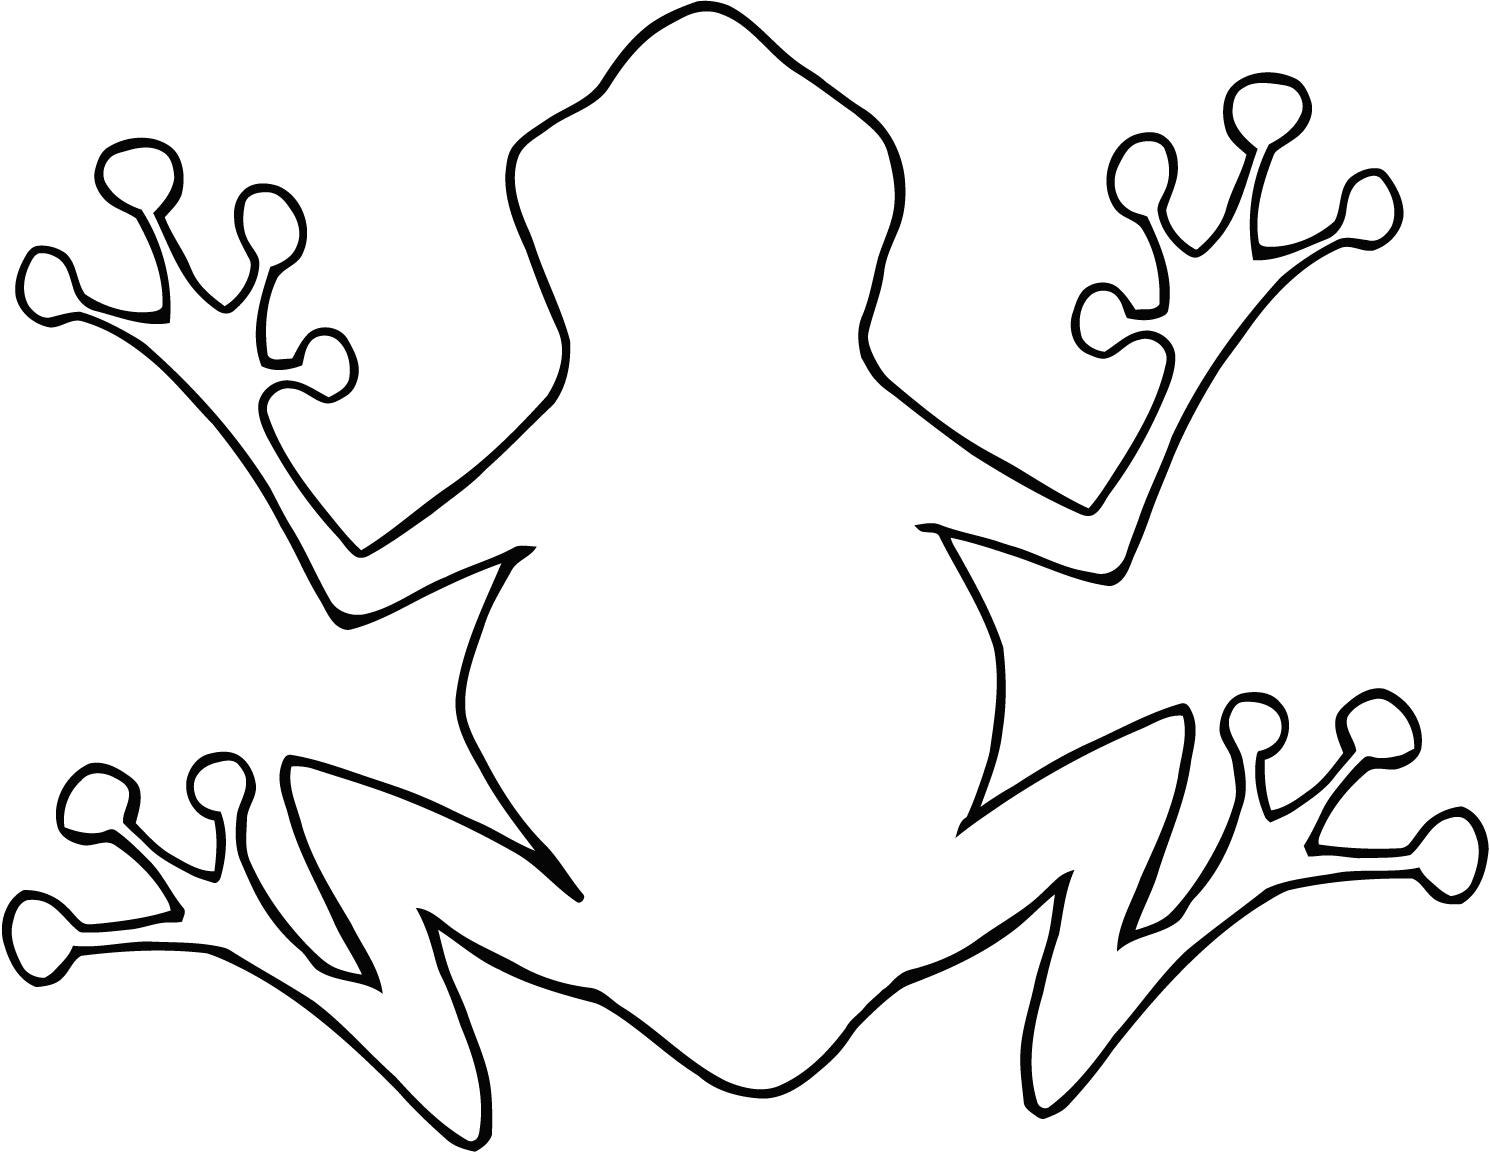 Tree Frog Outline   Clipart Panda   Free Clipart Images